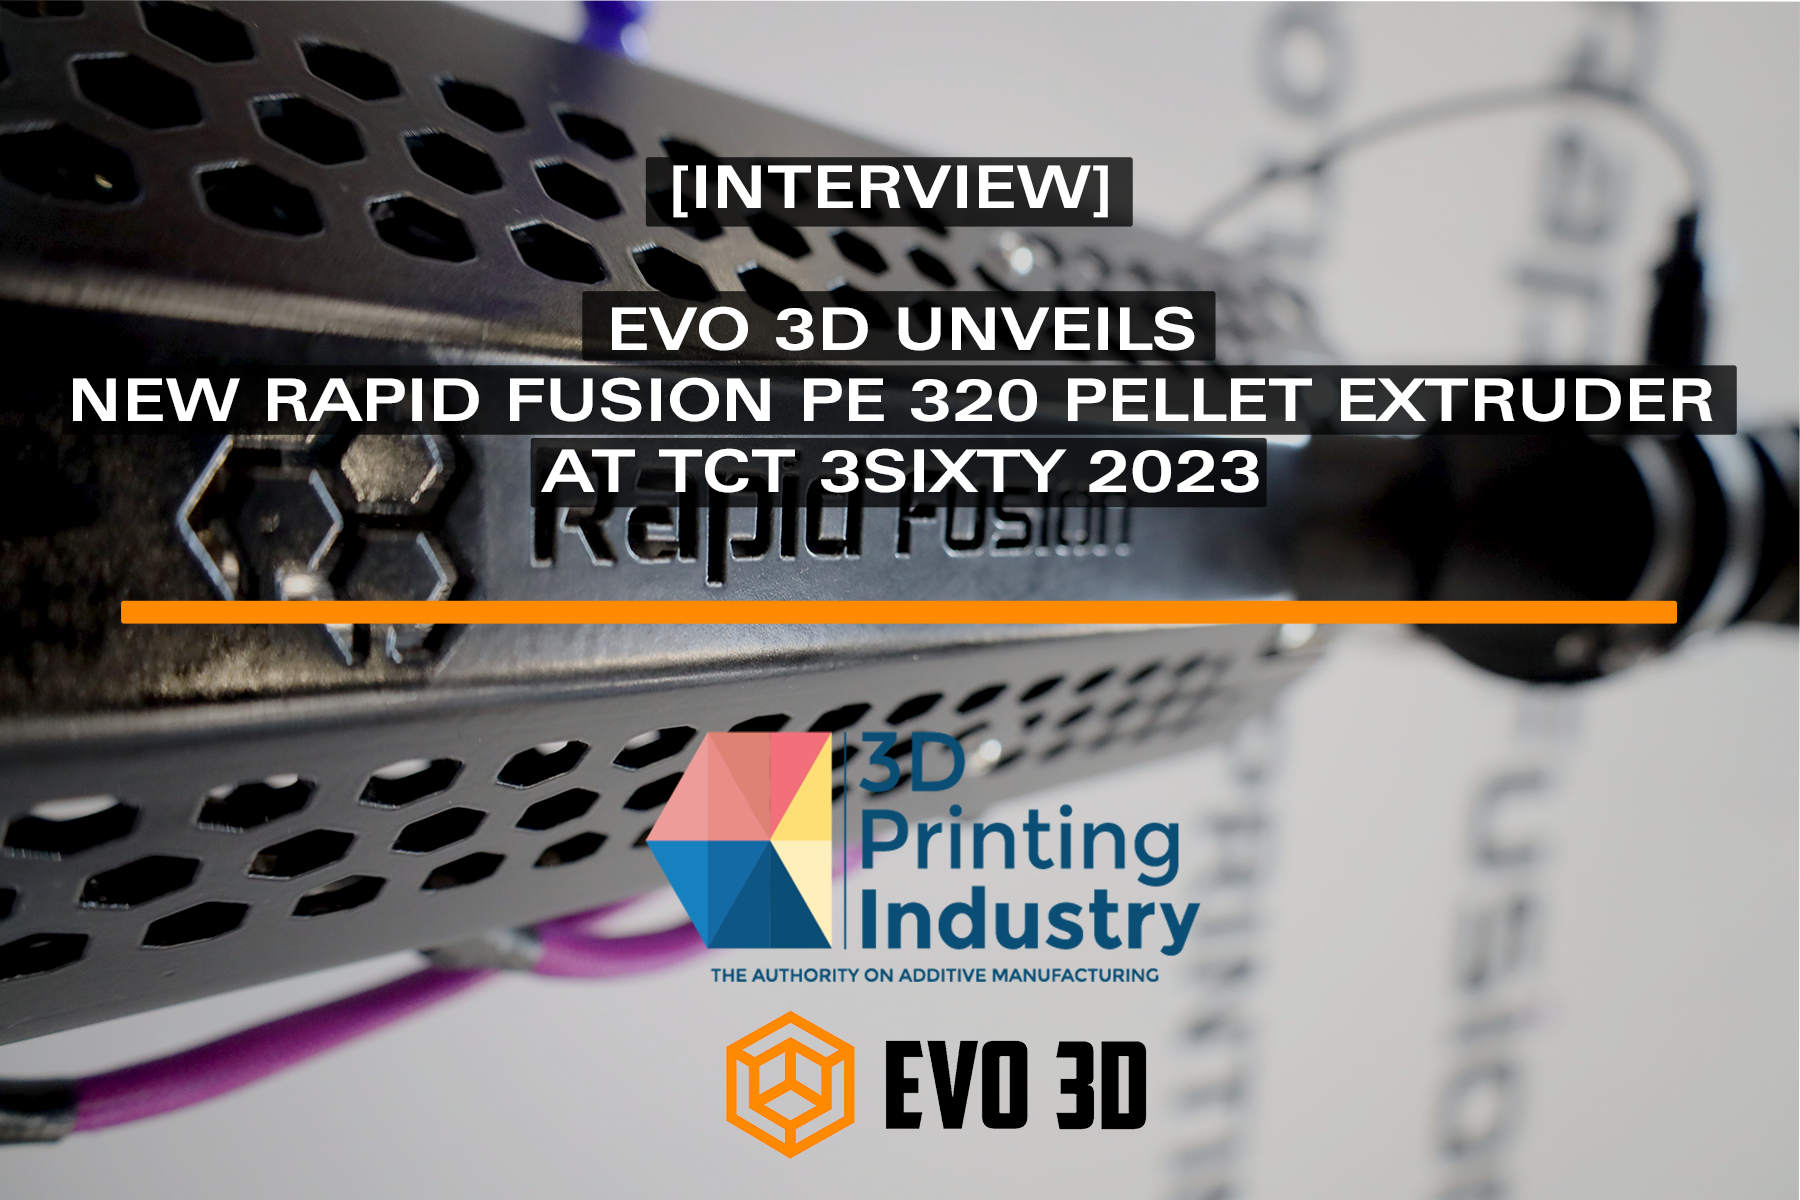 [Interview] evo 3d unveils new rapid fusion pe 320 pellet extruder at tct 3sixty 2023 (by alex tyreer-jones of 3d printing industry)